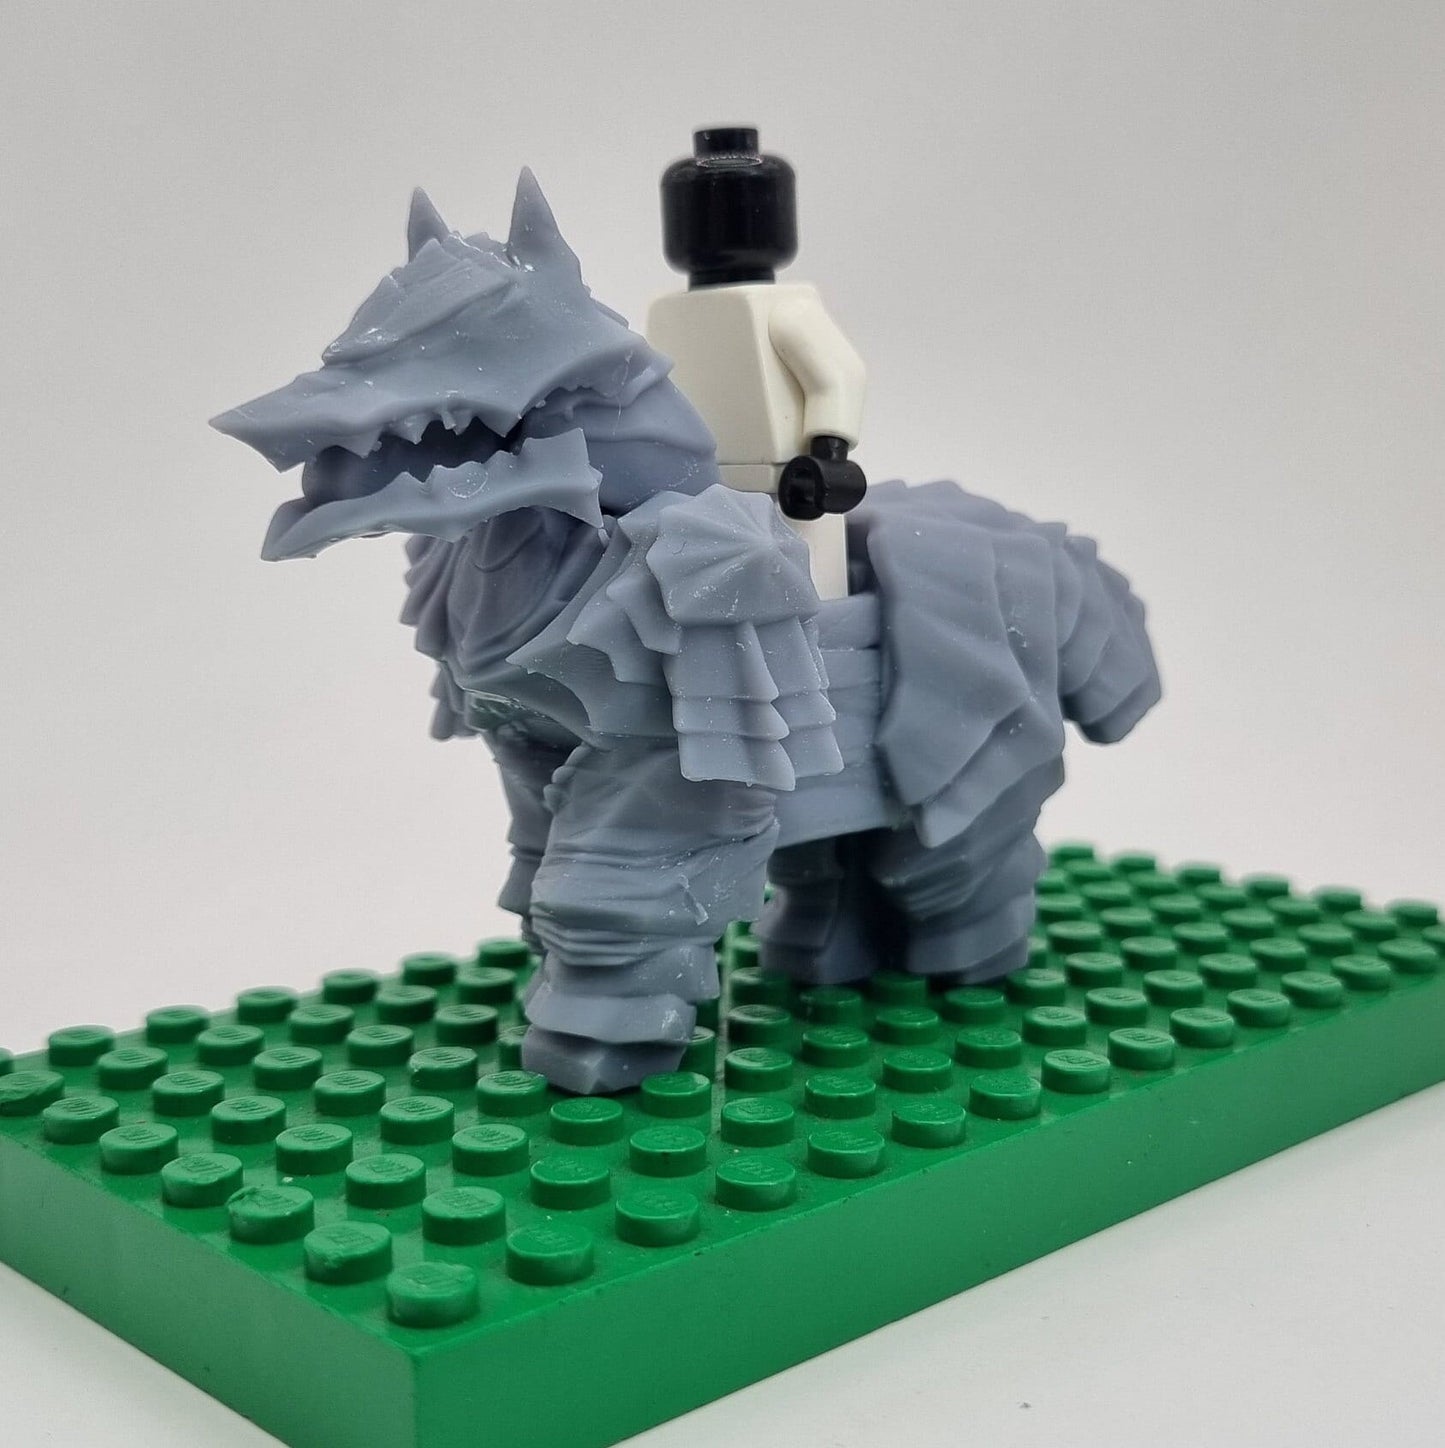 Building toy custom 3D printed armored horse!